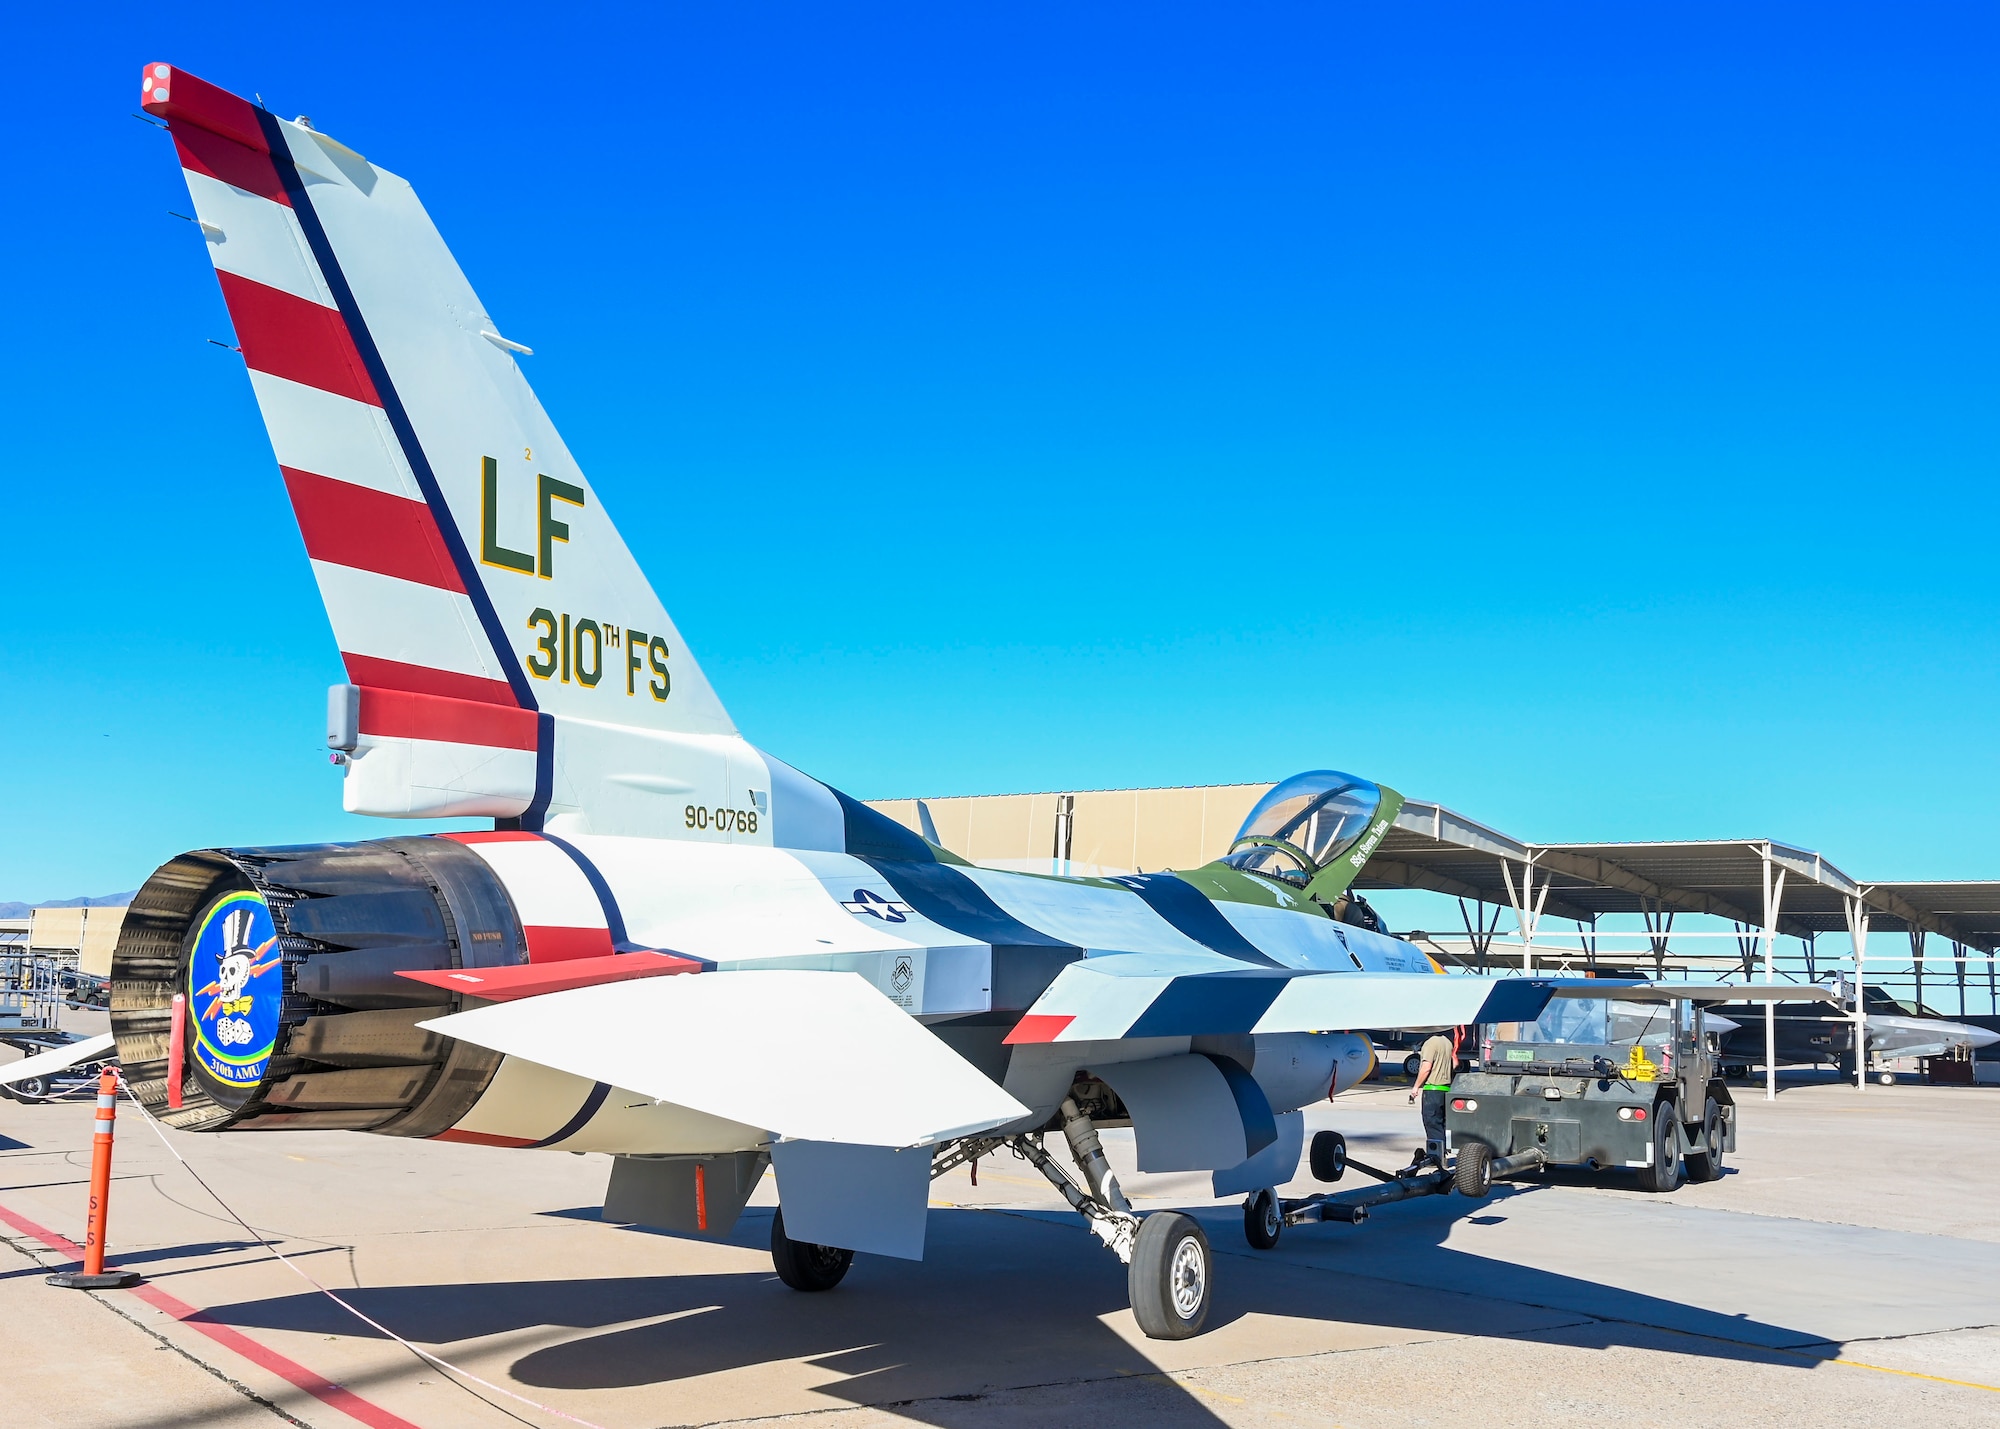 Luke F16 gets heritage paint in celebration of 310th FS’s 80th